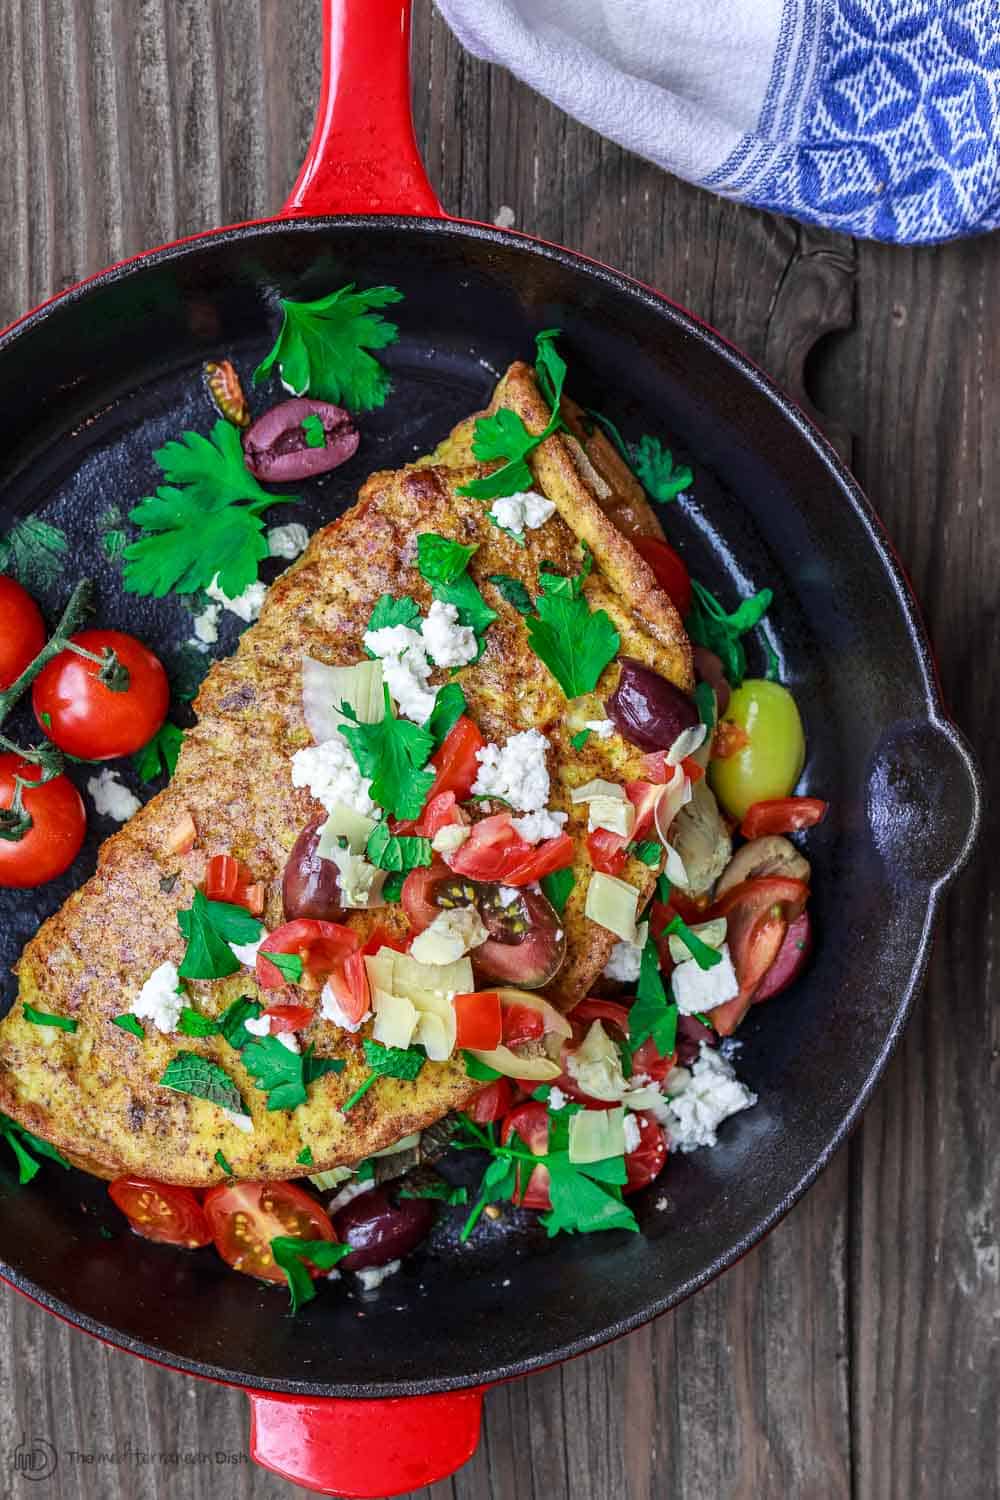 Mixed vegetables, olives and feta cheese garnish this egg omelette